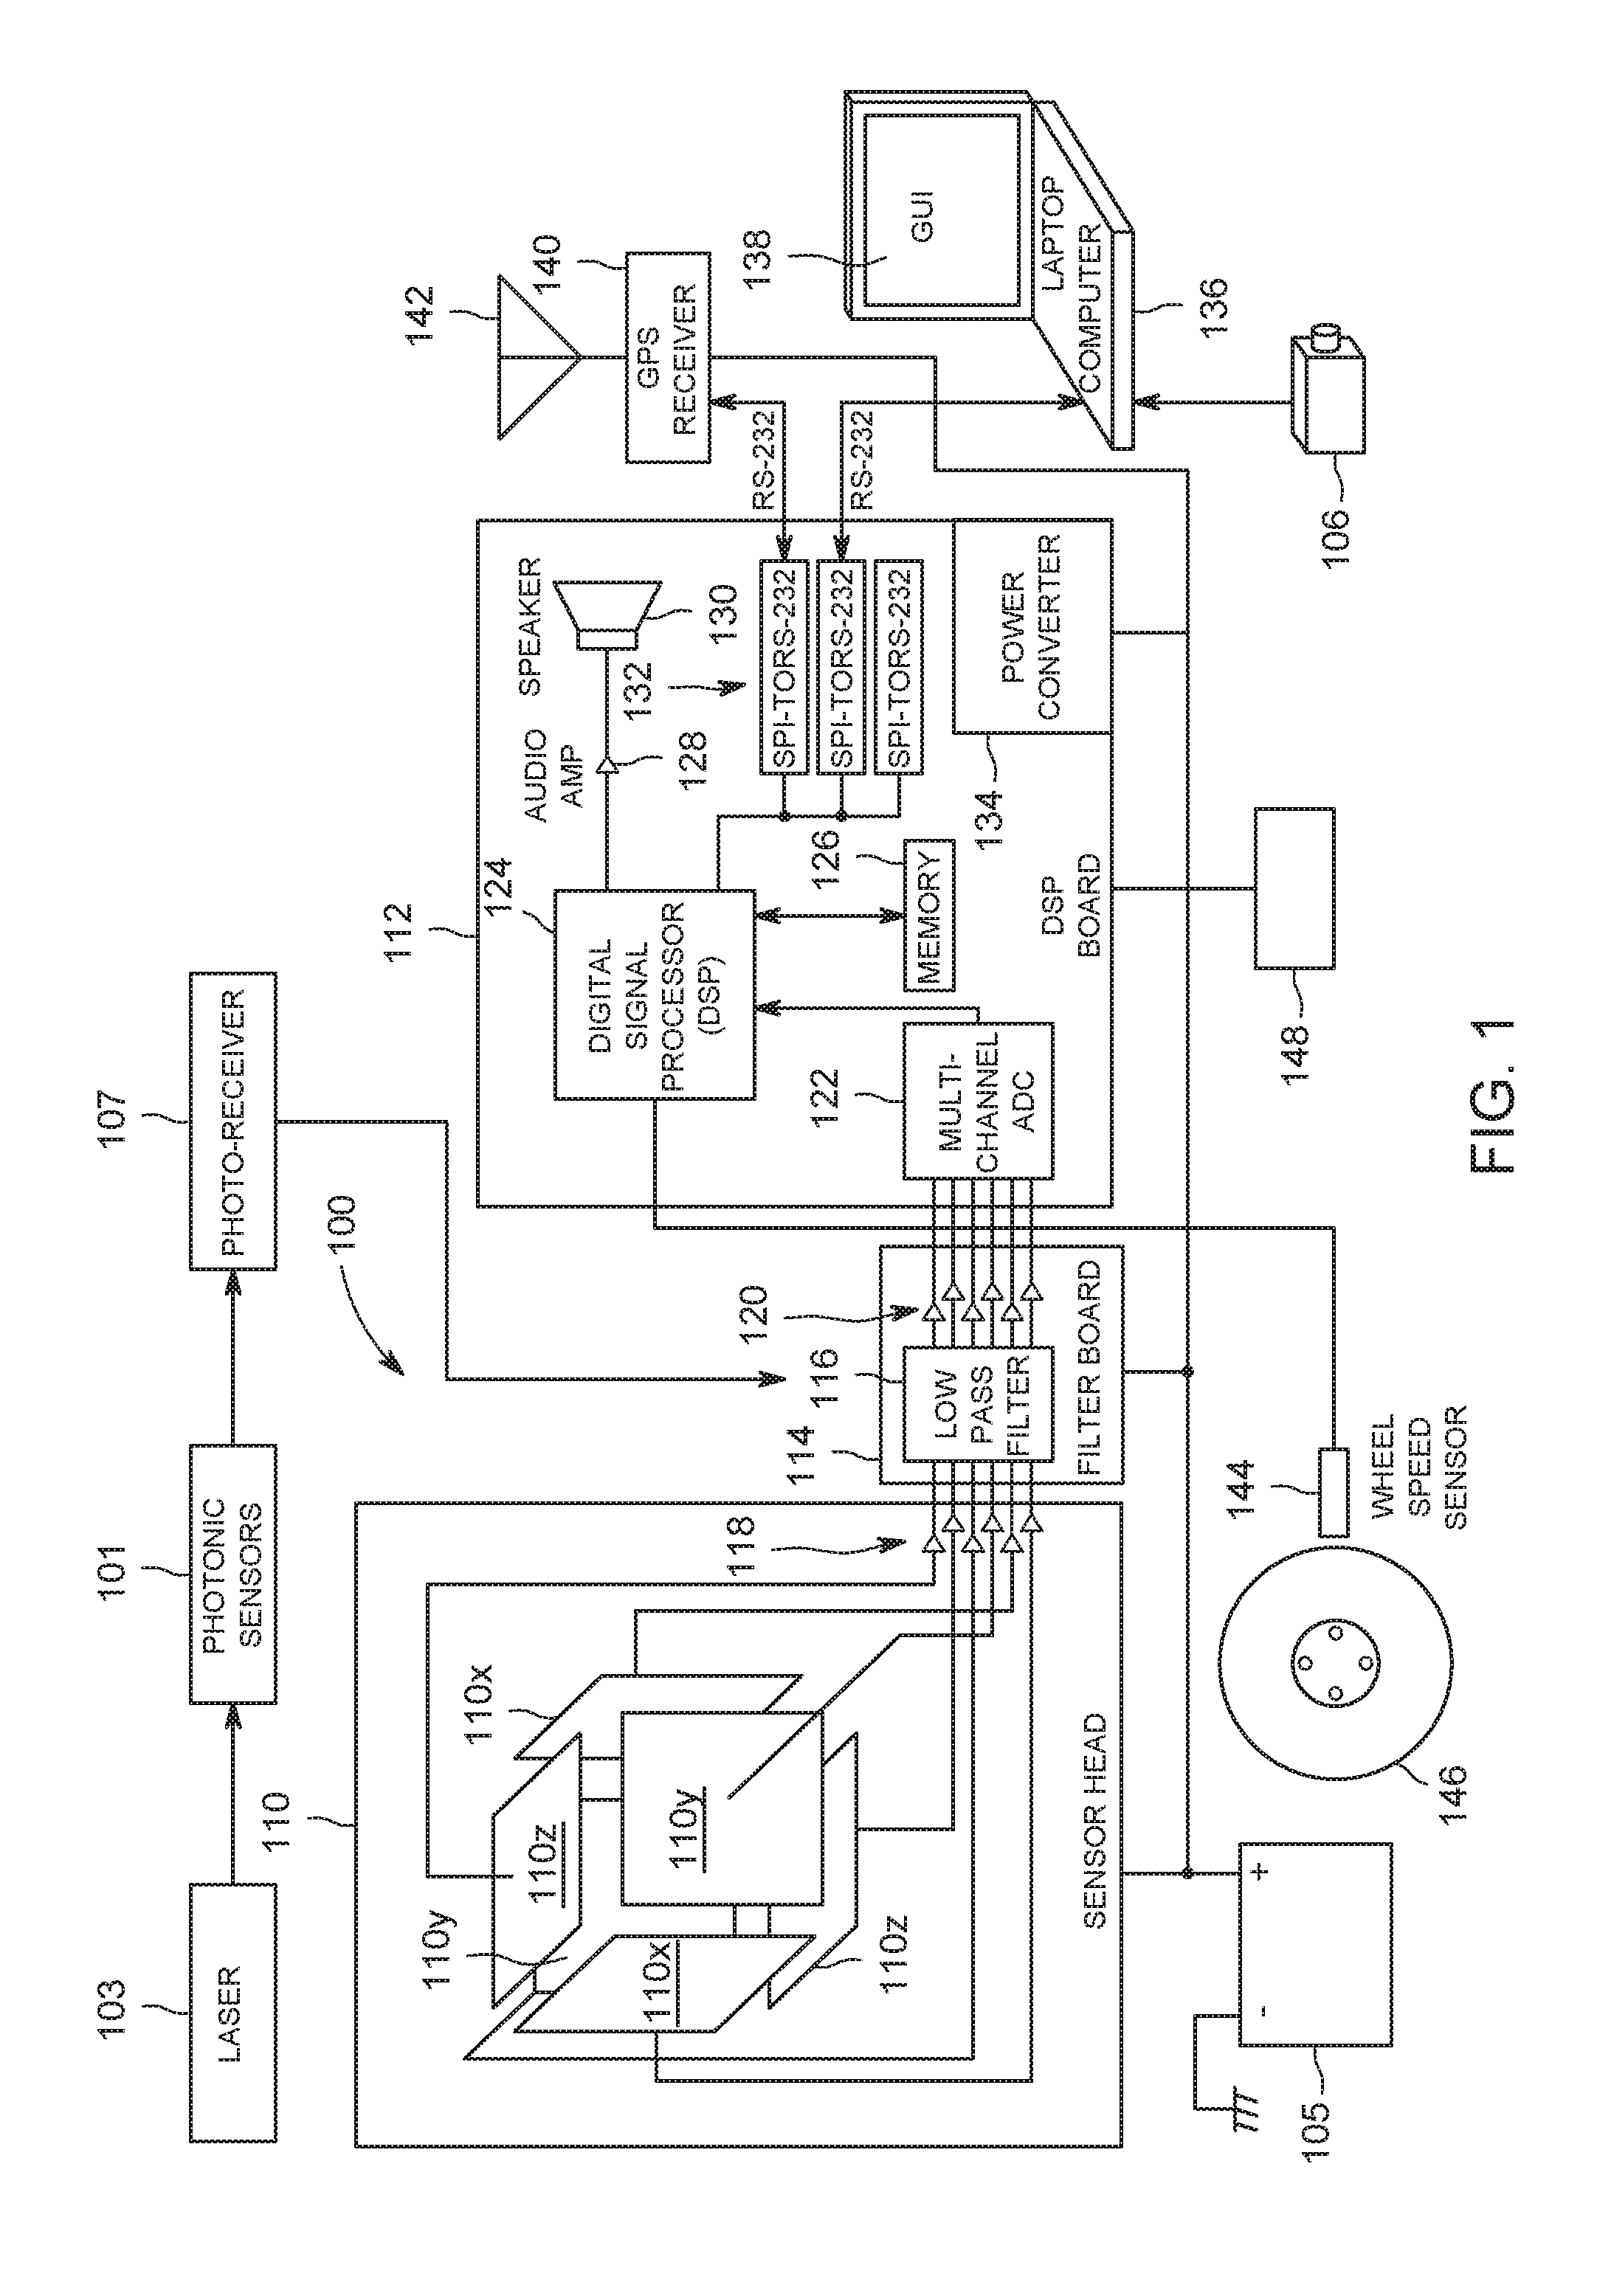 Apparatus and method for monitoring and controlling detection of stray voltage anomalies using a photonic sensor